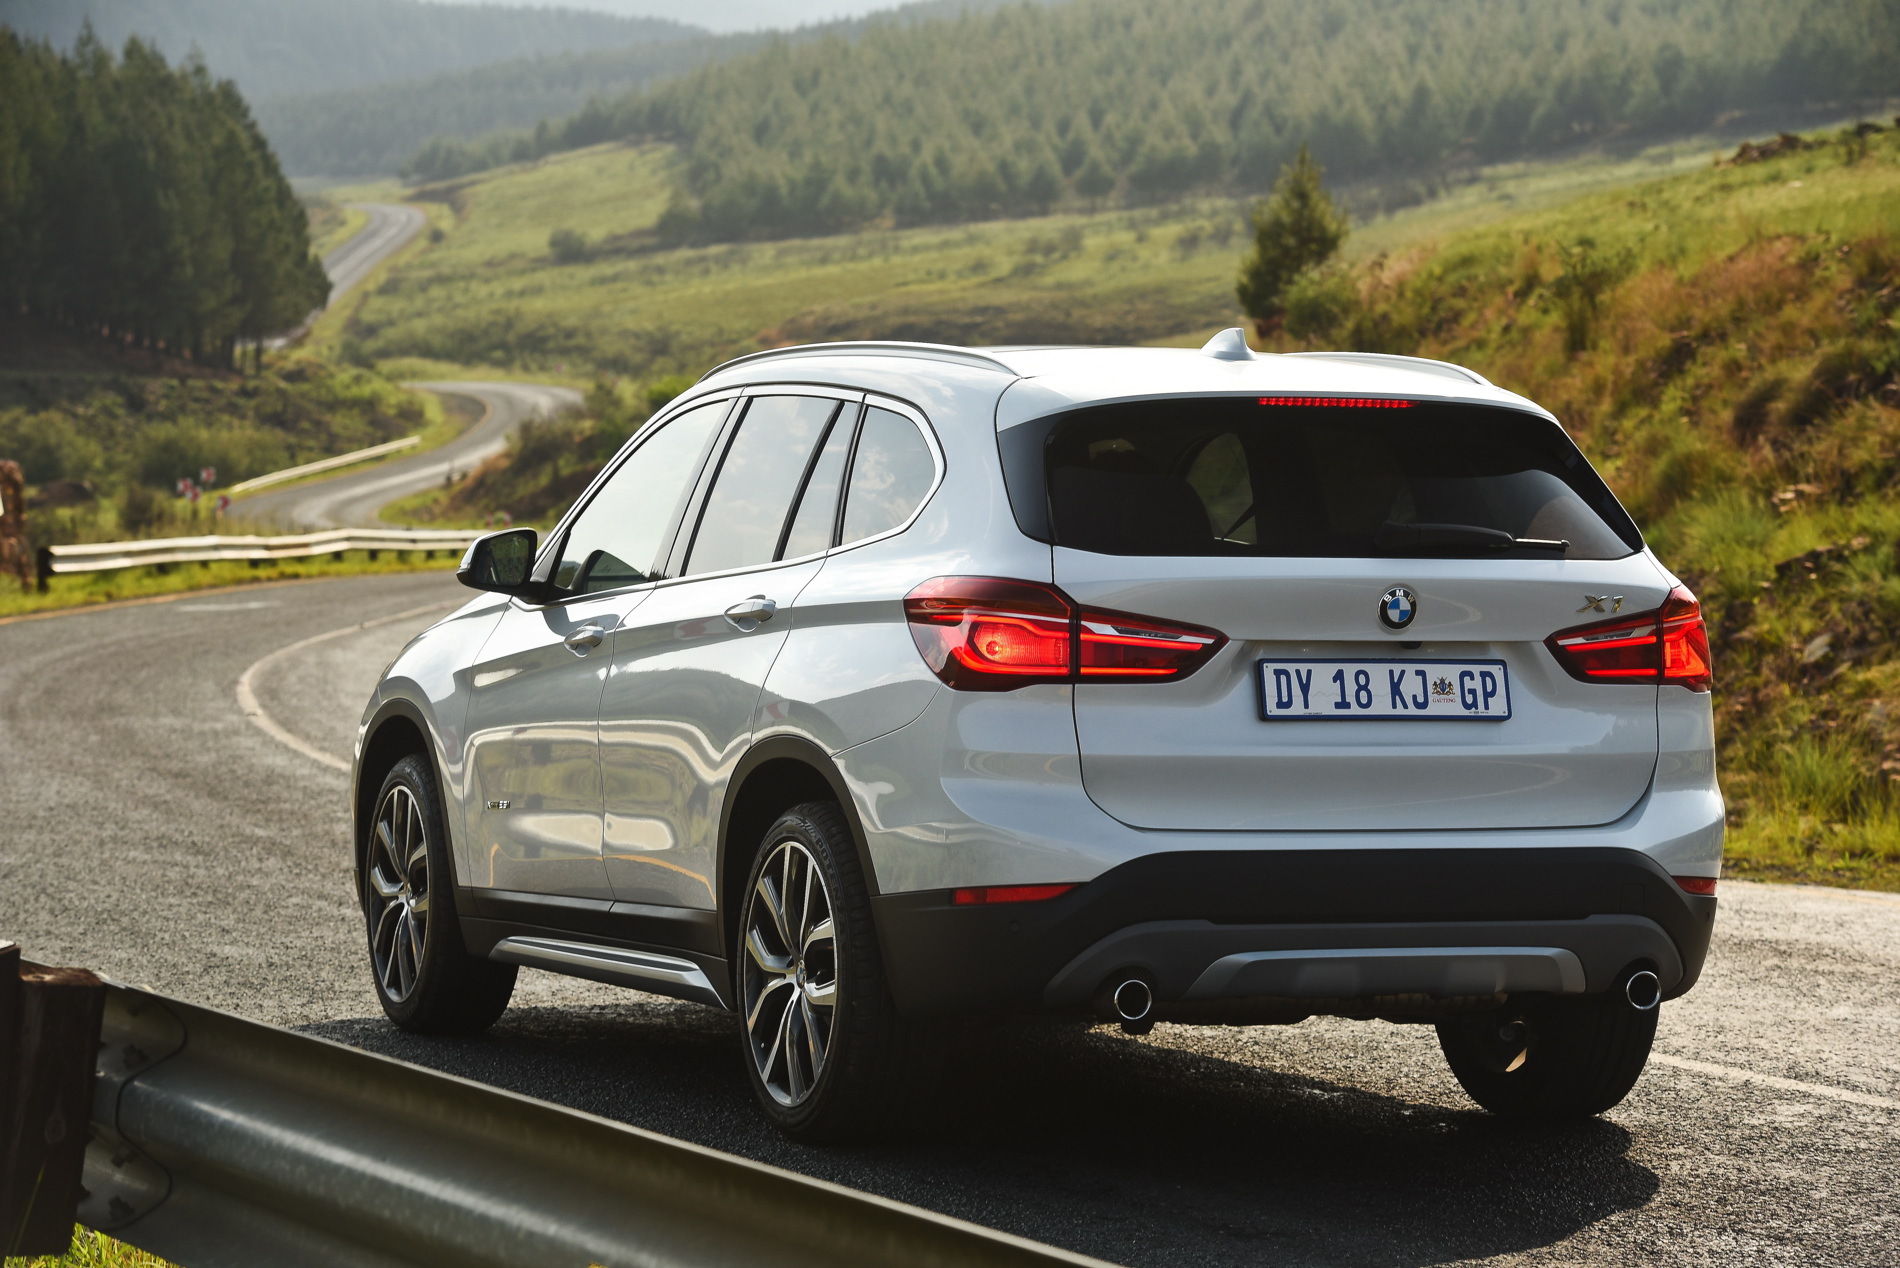 2016 BMW X1 photo gallery from South Africa